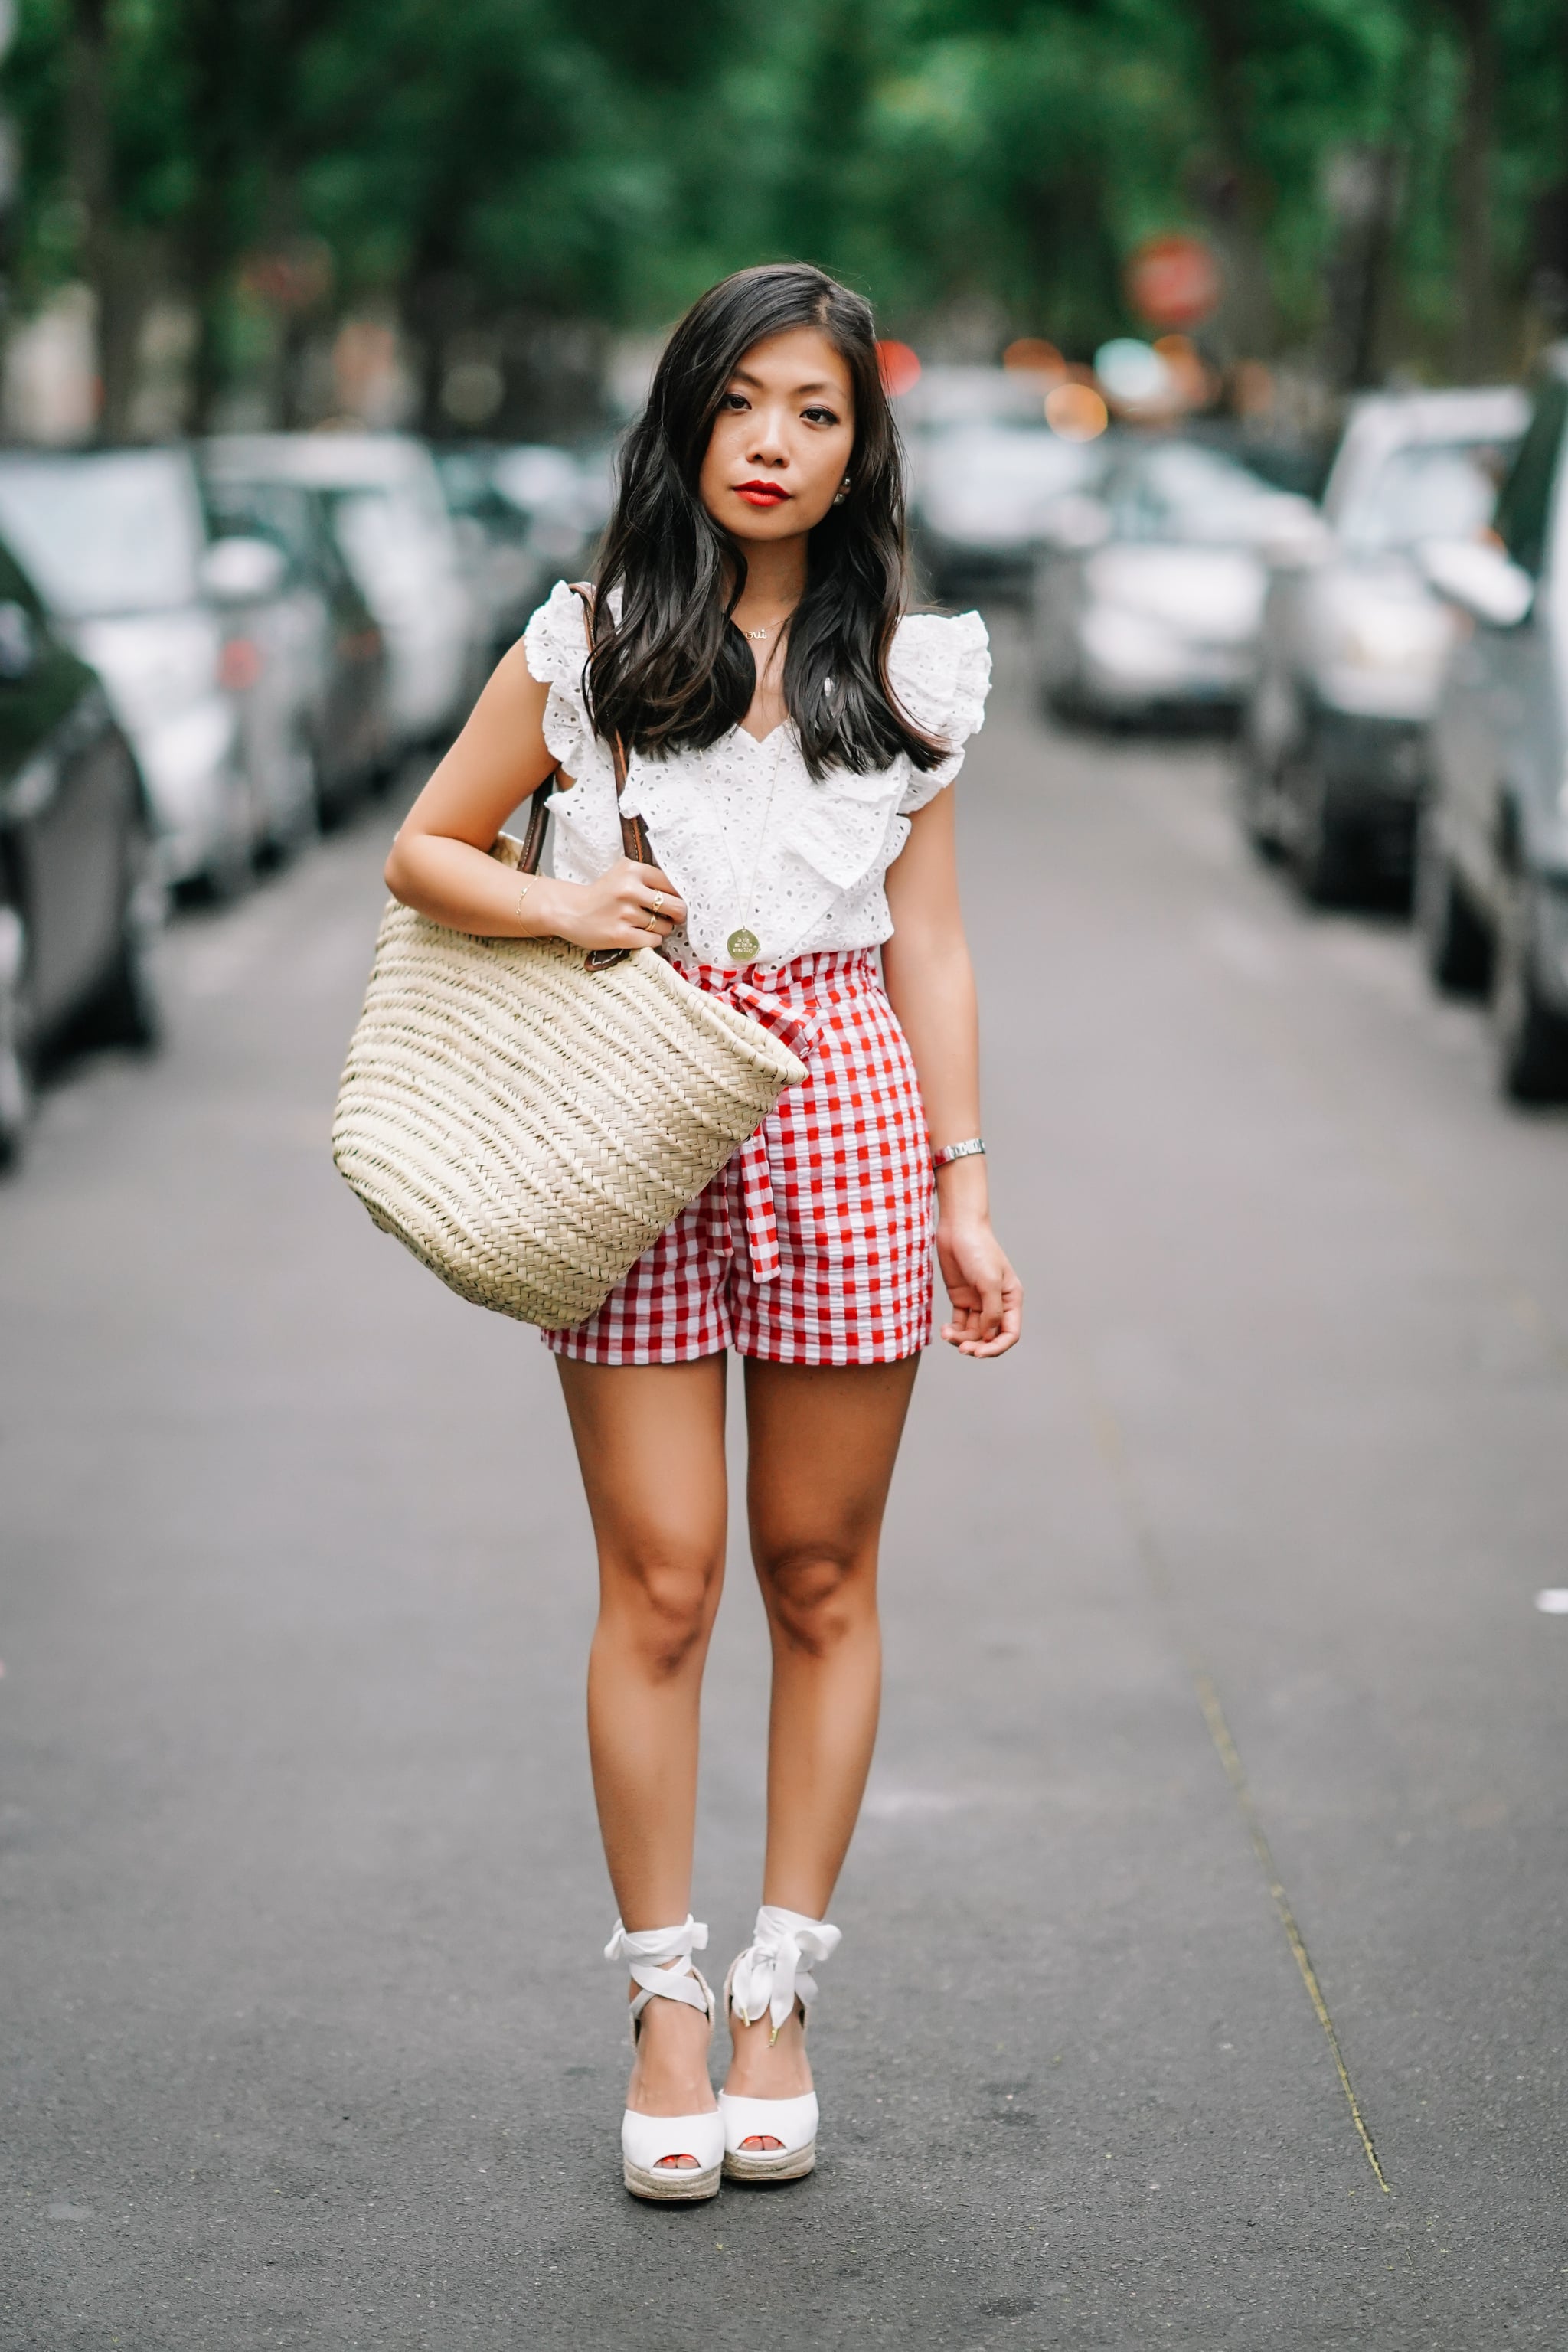 shoes to wear with shorts female 2019